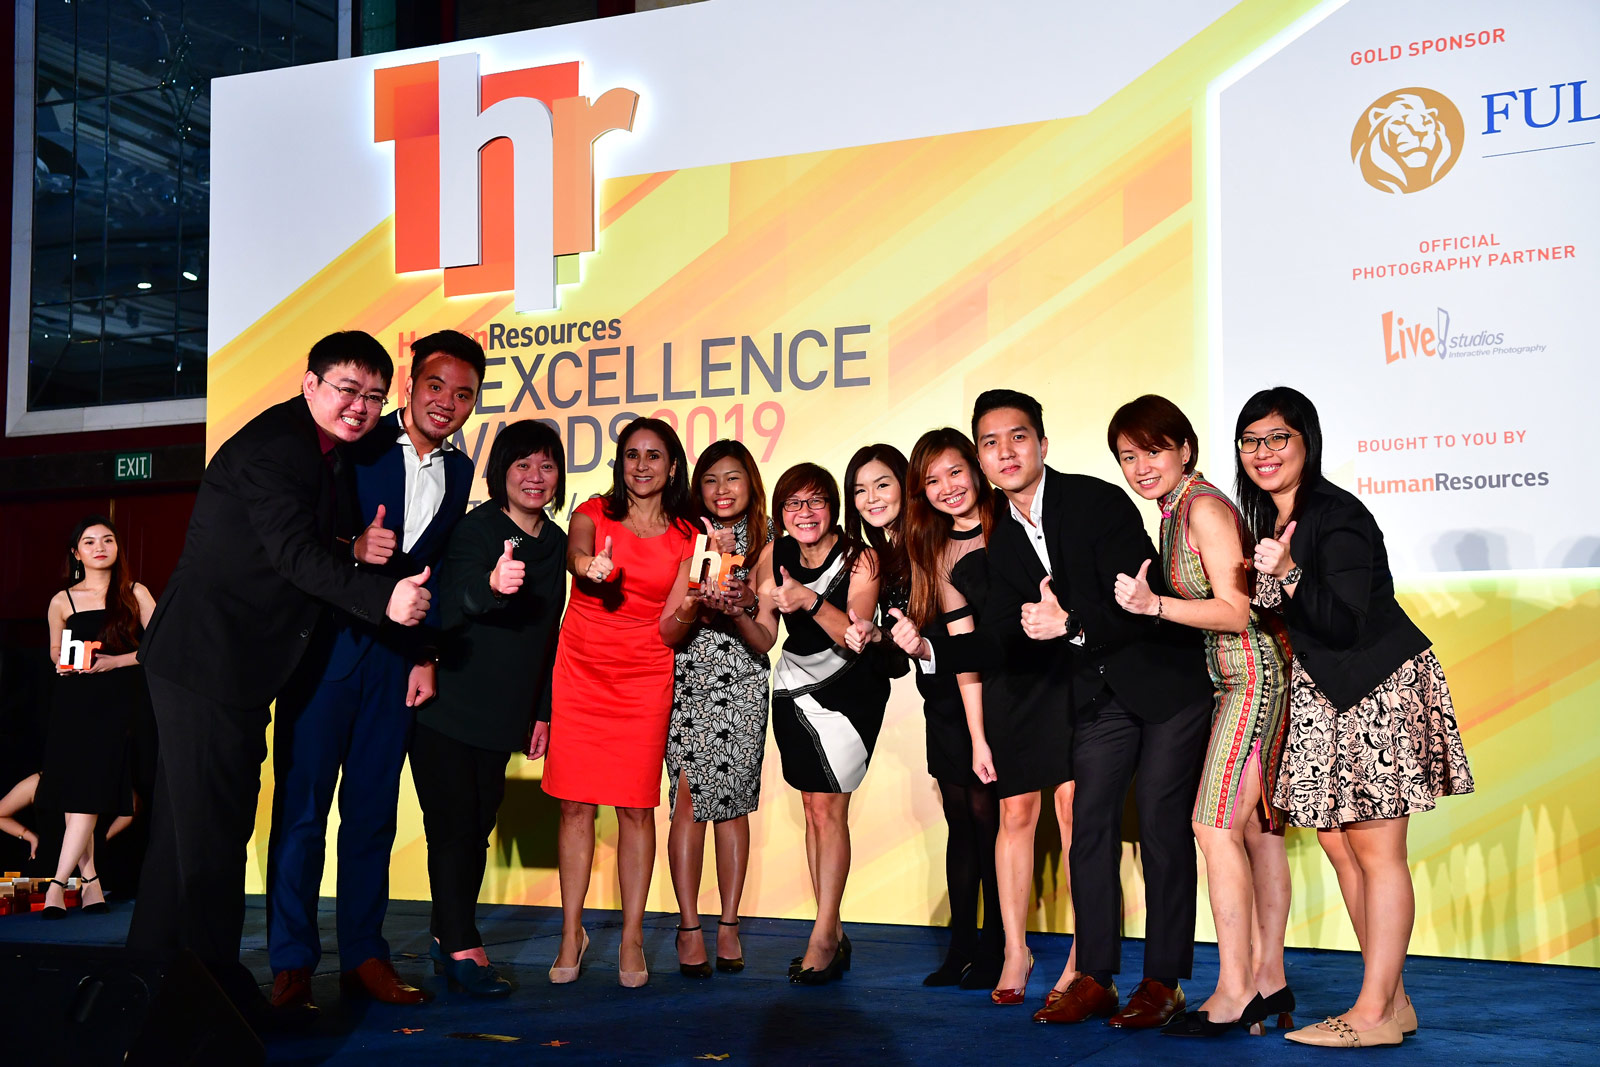 HR Excellence Award – Bronze for Excellence in Recruitment